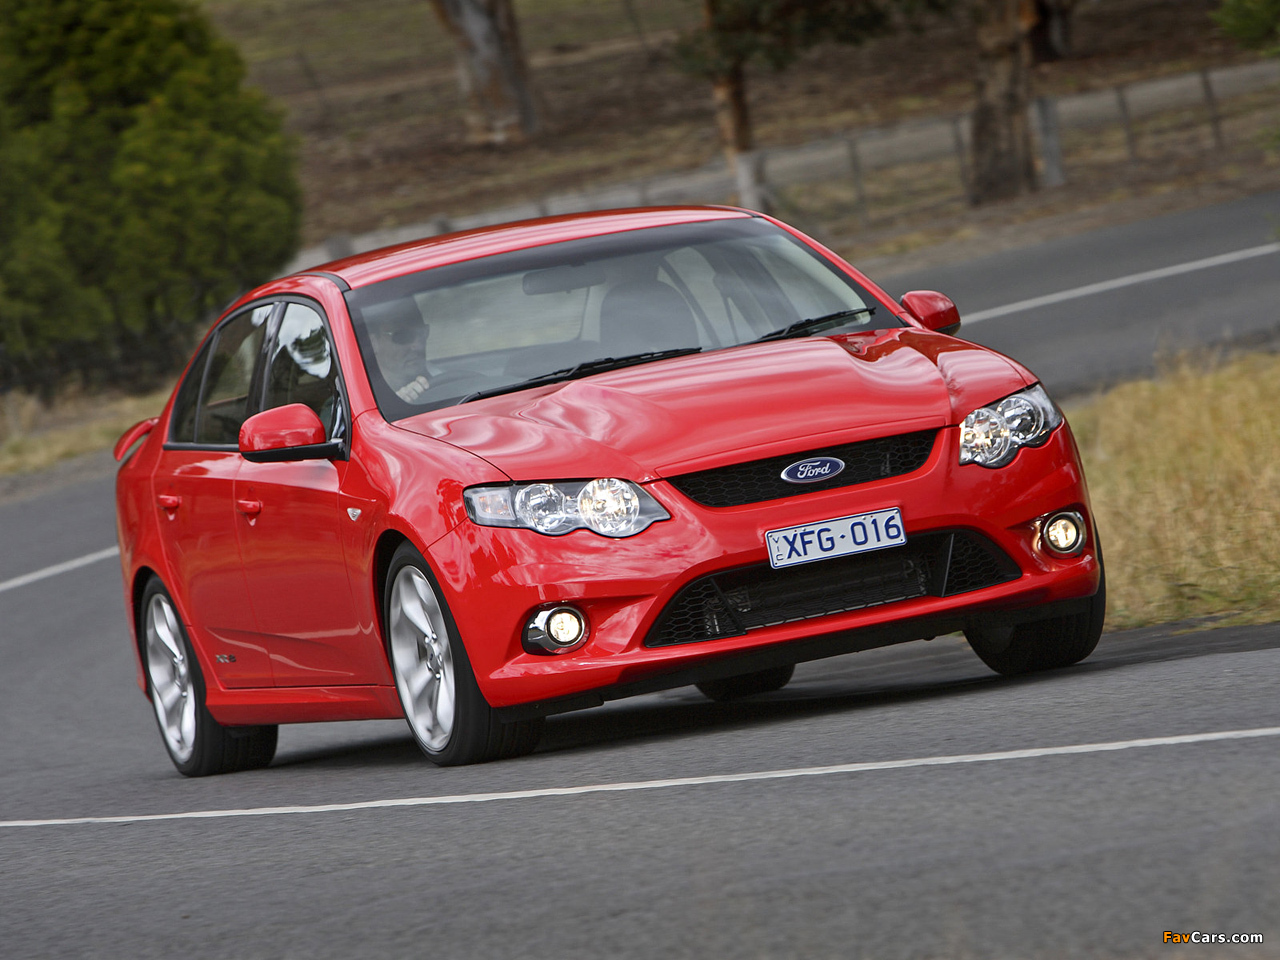 Ford Falcon XR8 (FG) 2008–11 pictures (1280 x 960)